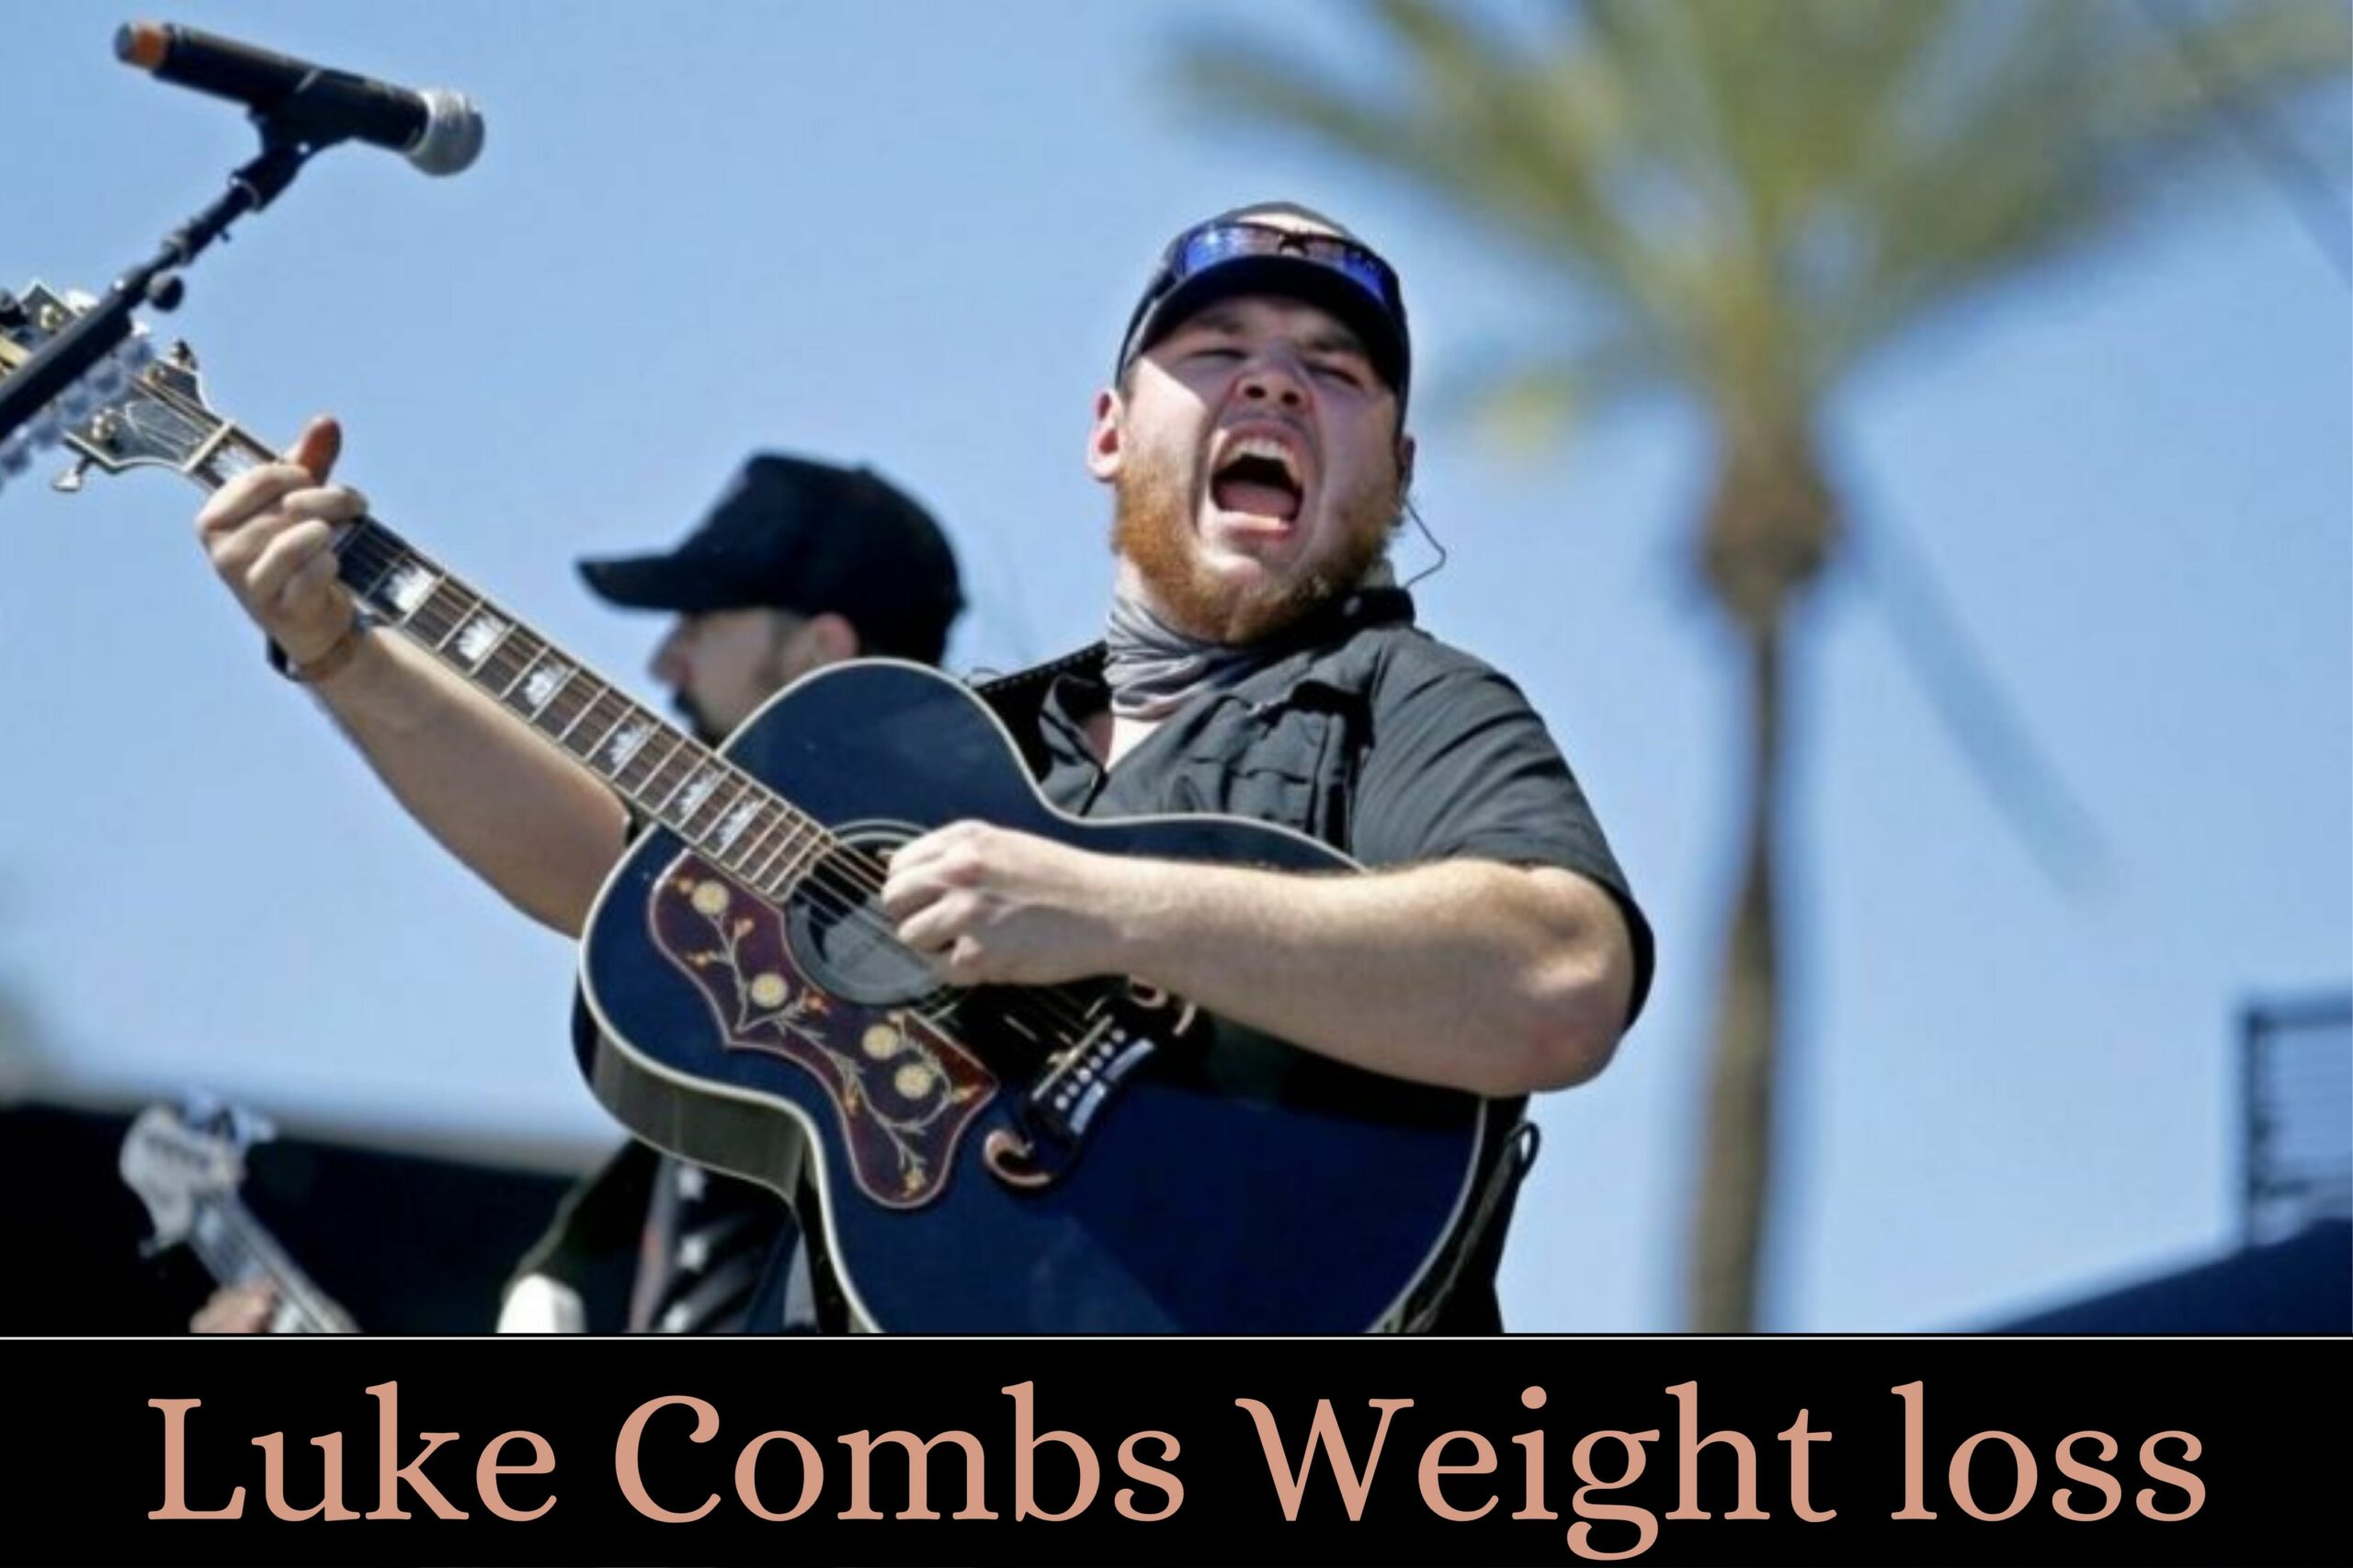 Luke Combs Before and After Weight loss: A Journey That Inspired Many!